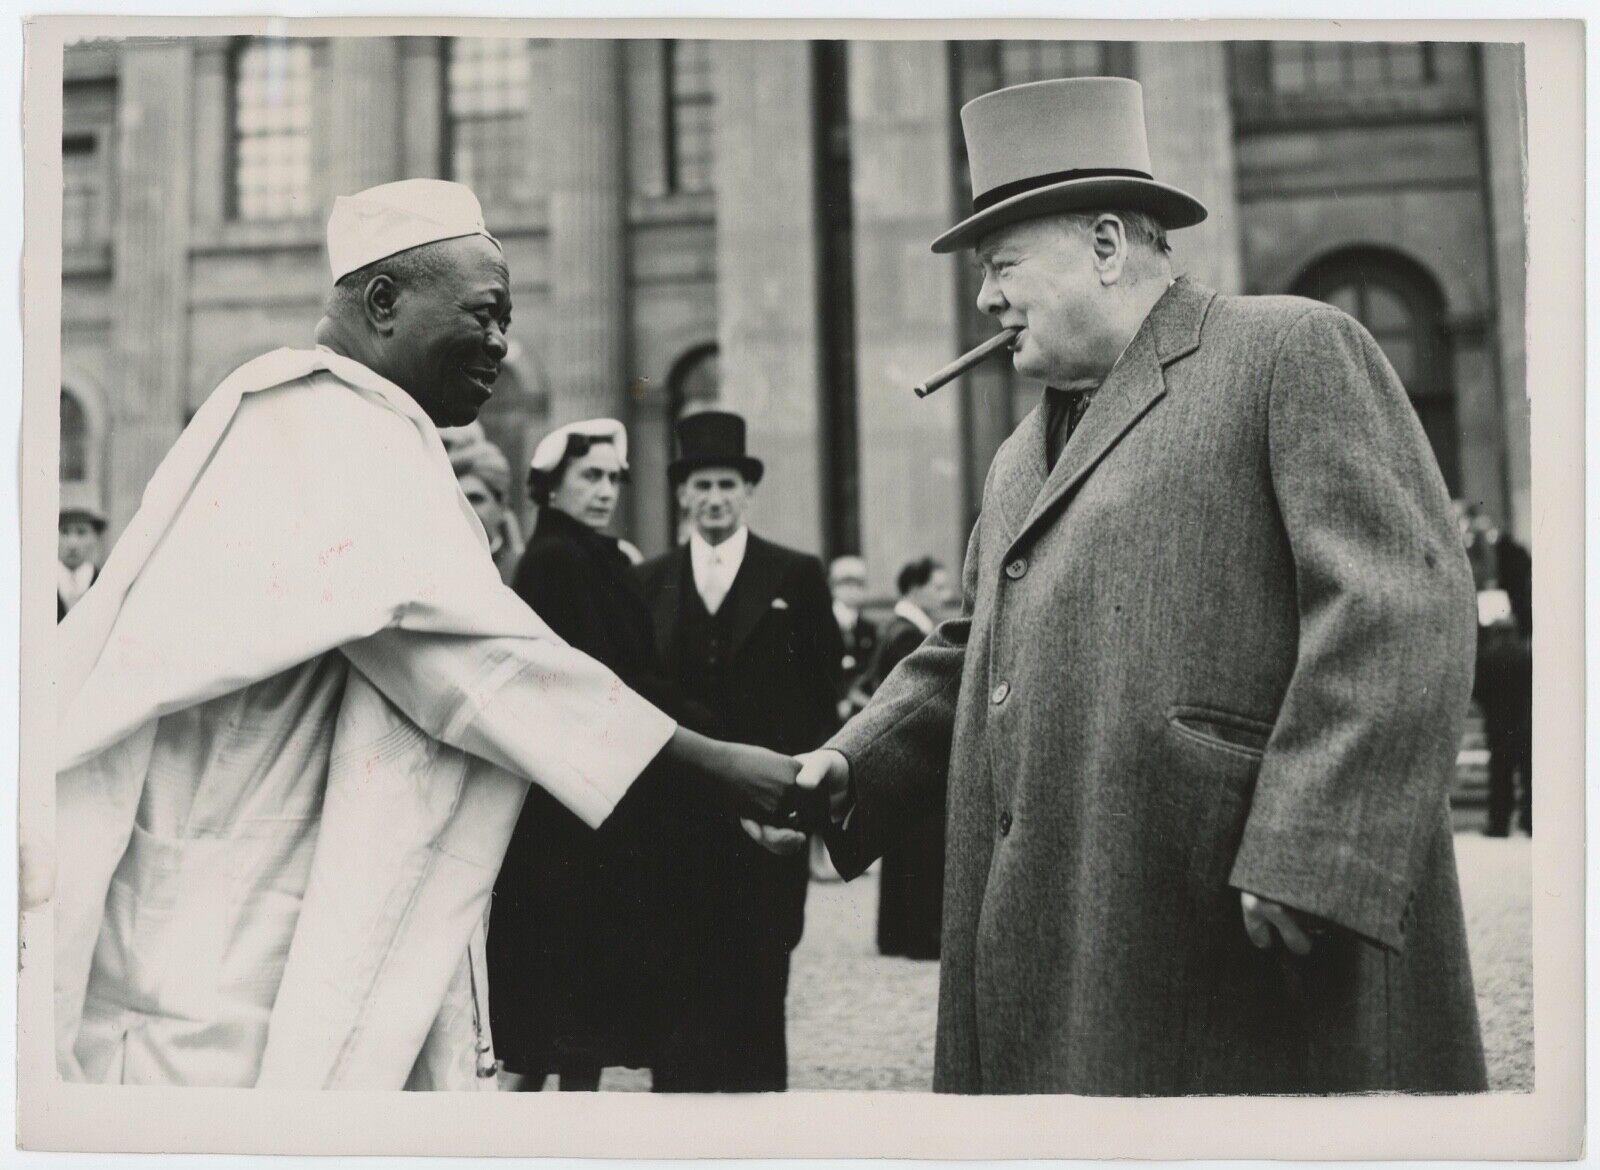 8 June 1953 press photo of Churchill shaking hands with the Ooni of Ife